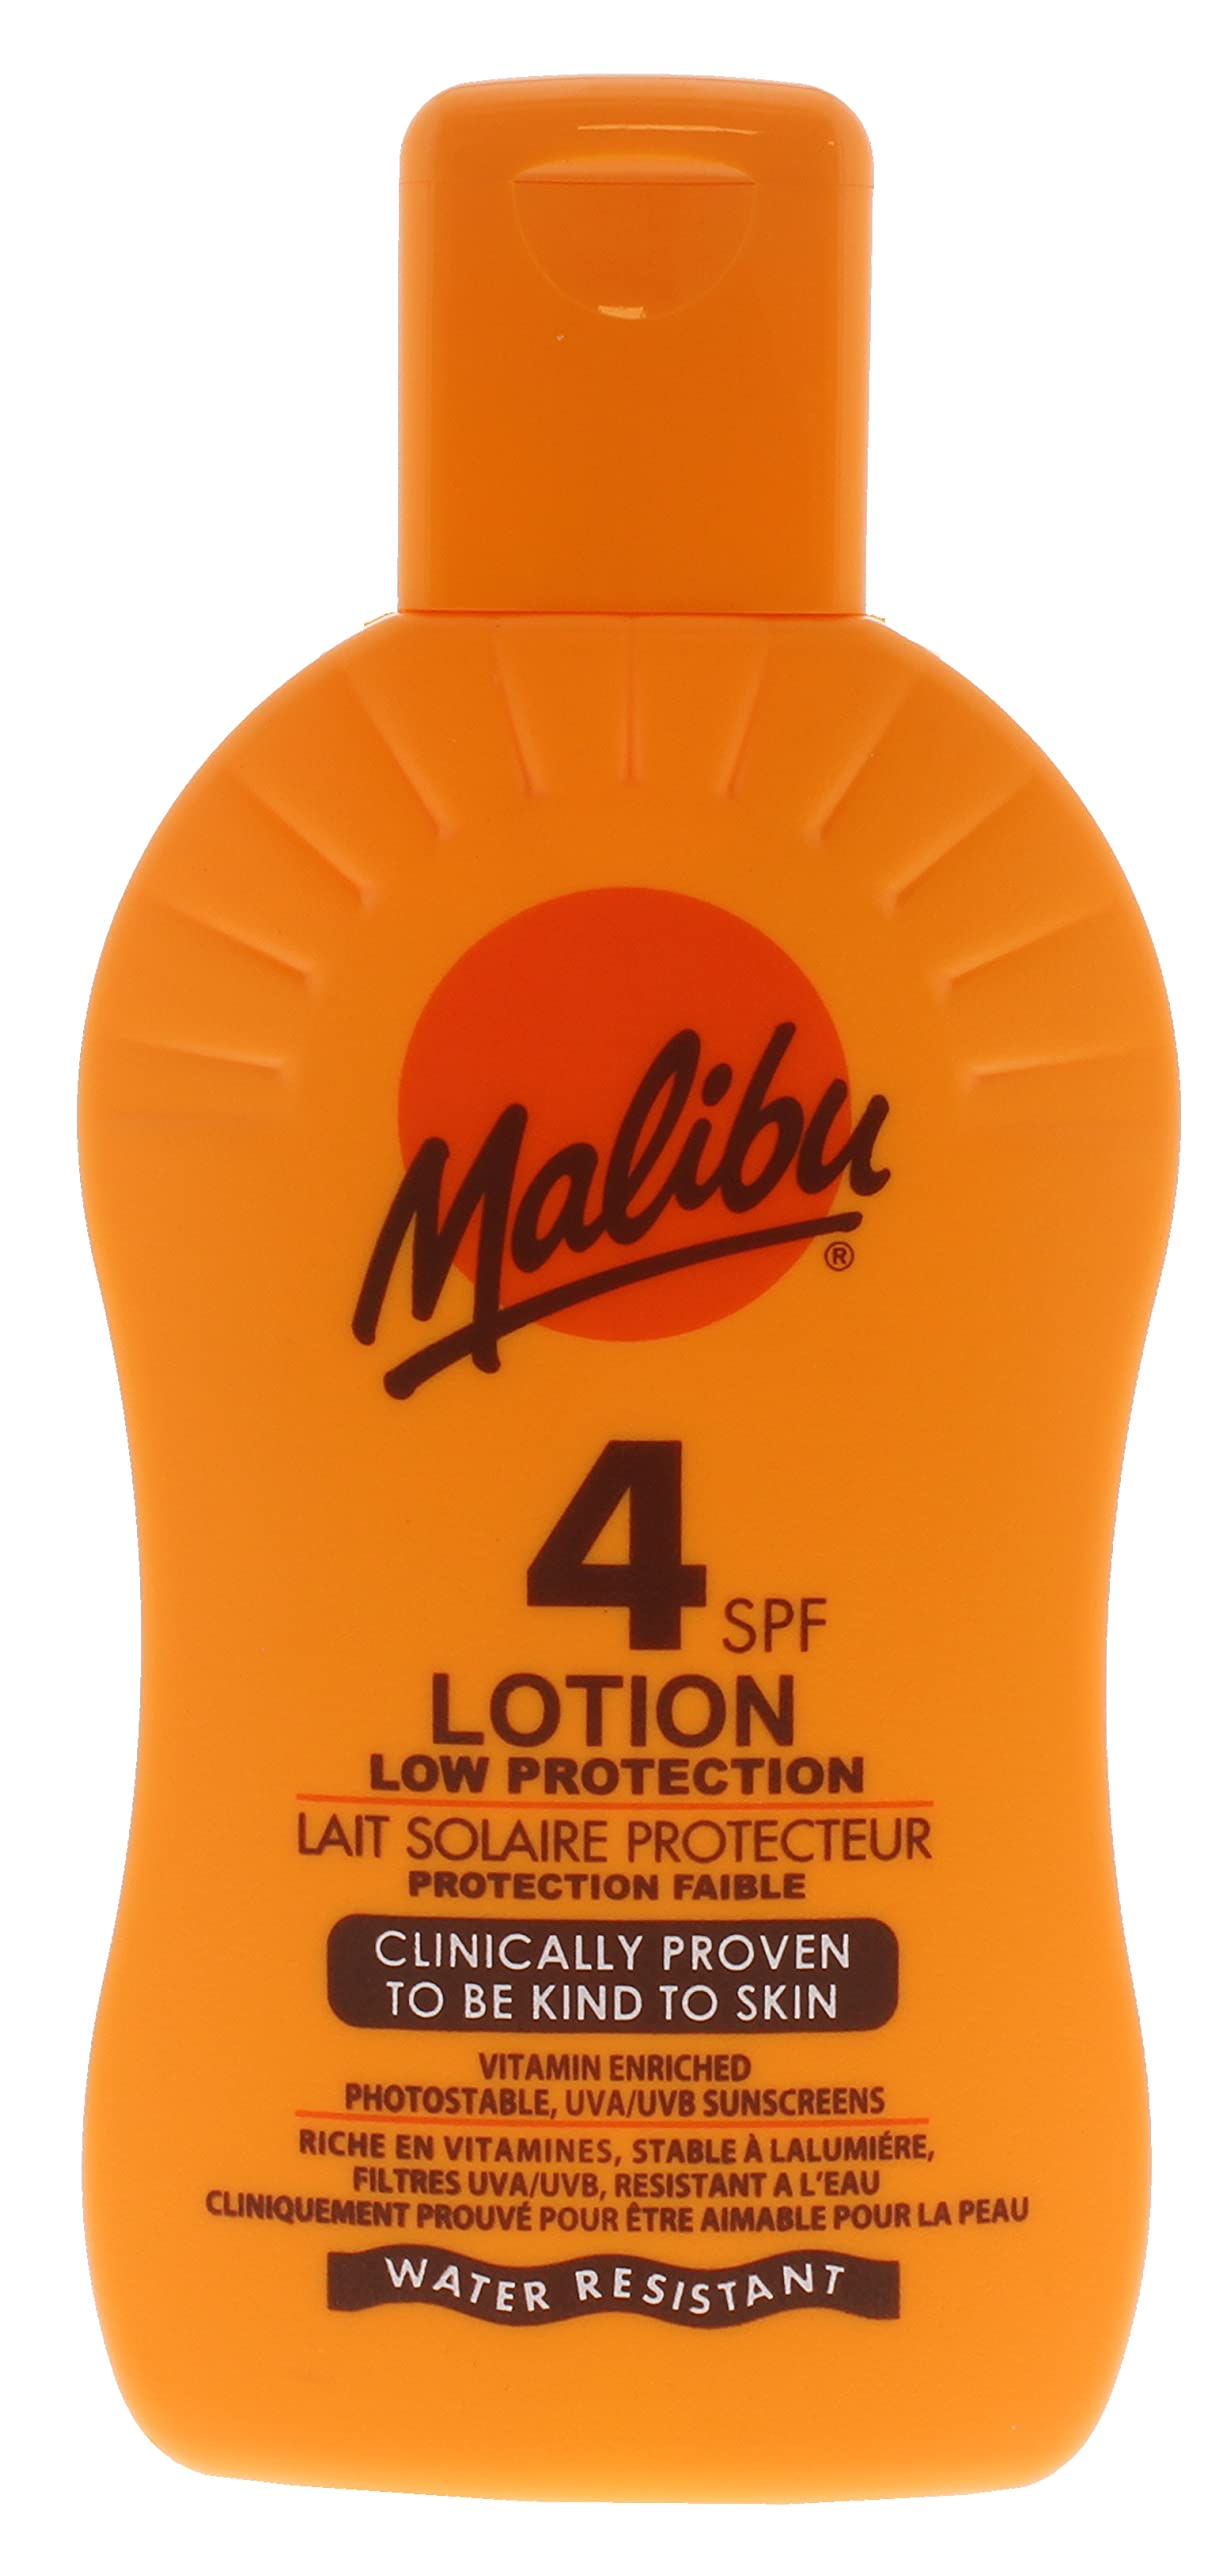 Malibu Low Protection Water Resistant Vitamin Enriched SPF 4 Sun-Screen Lotion, 200ml